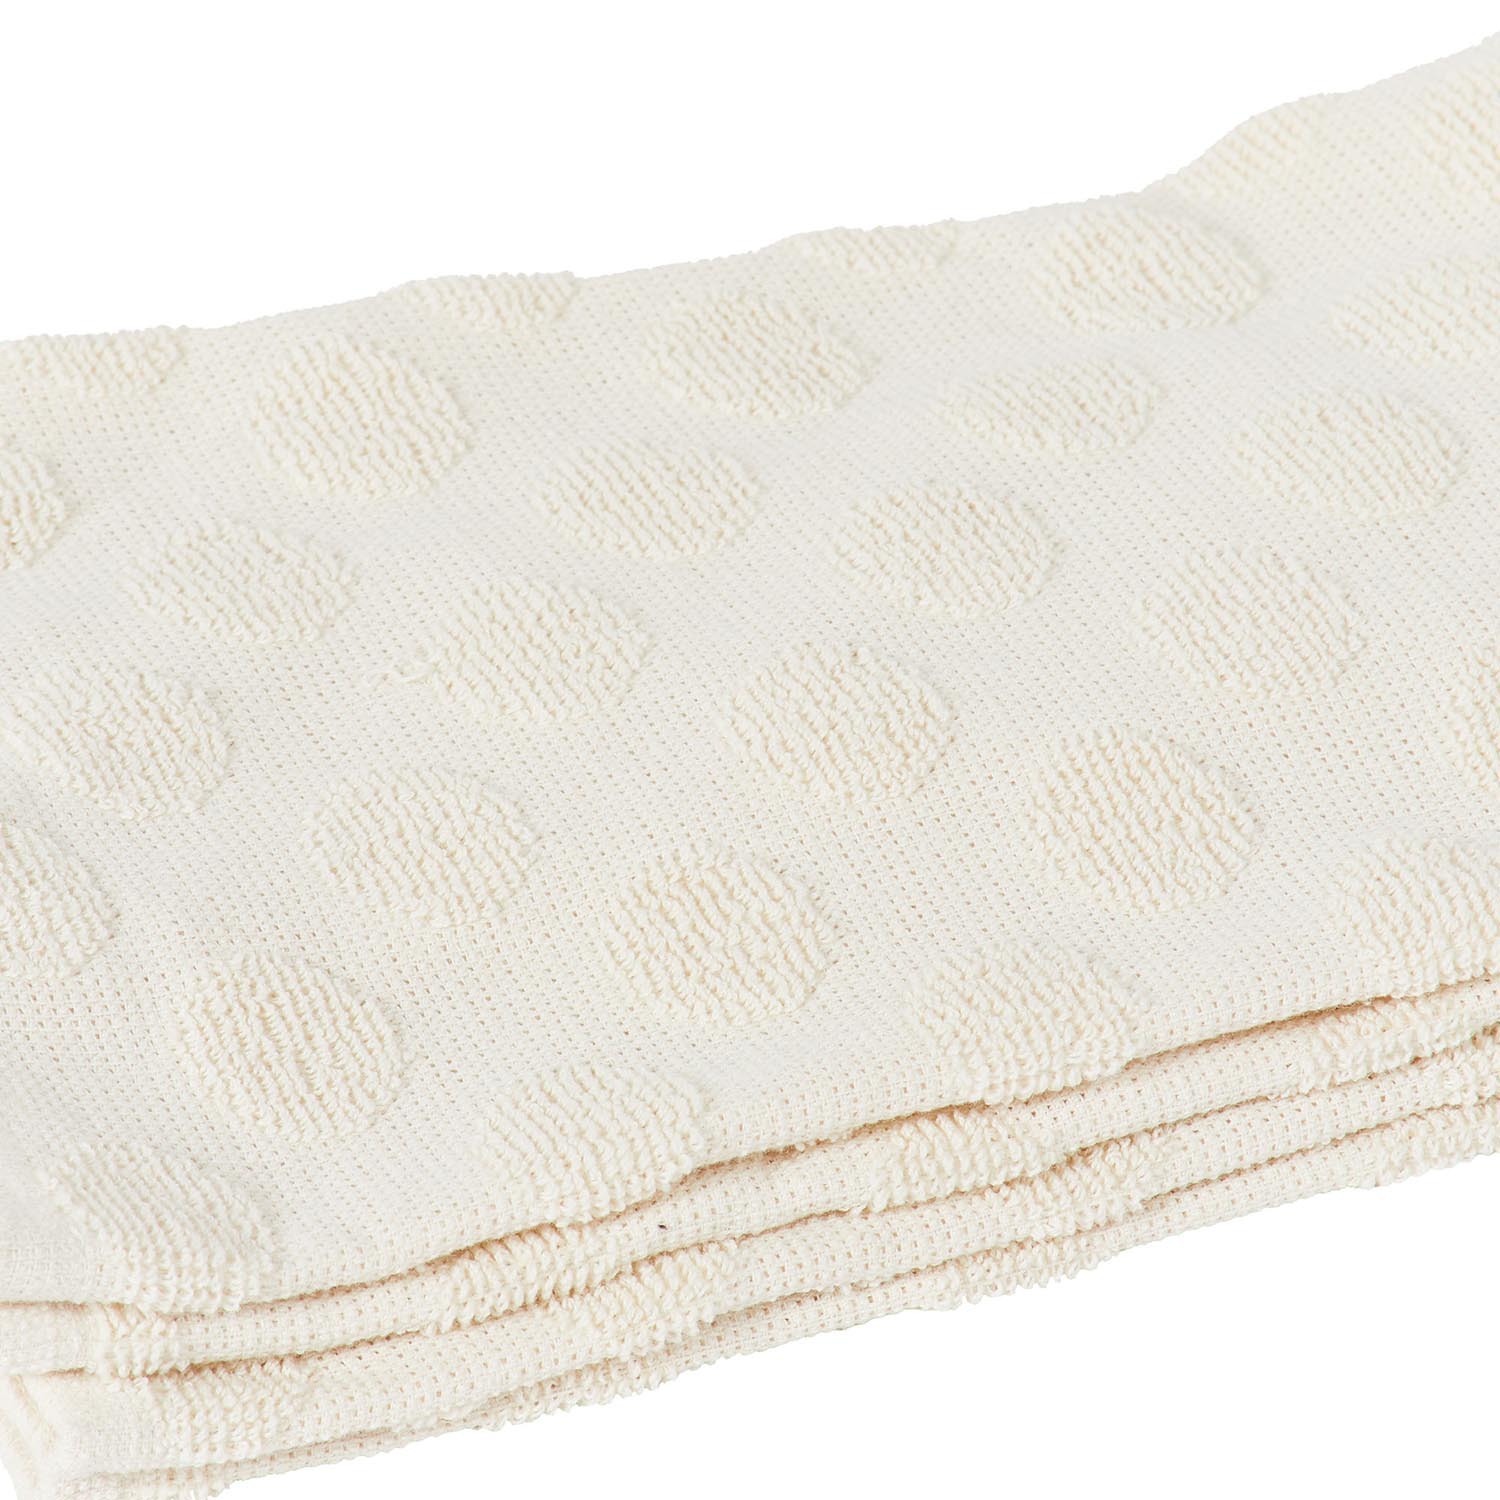 Pack of 2 Dobby Terry Kitchen Towels with Pom Poms - Cream Image 3